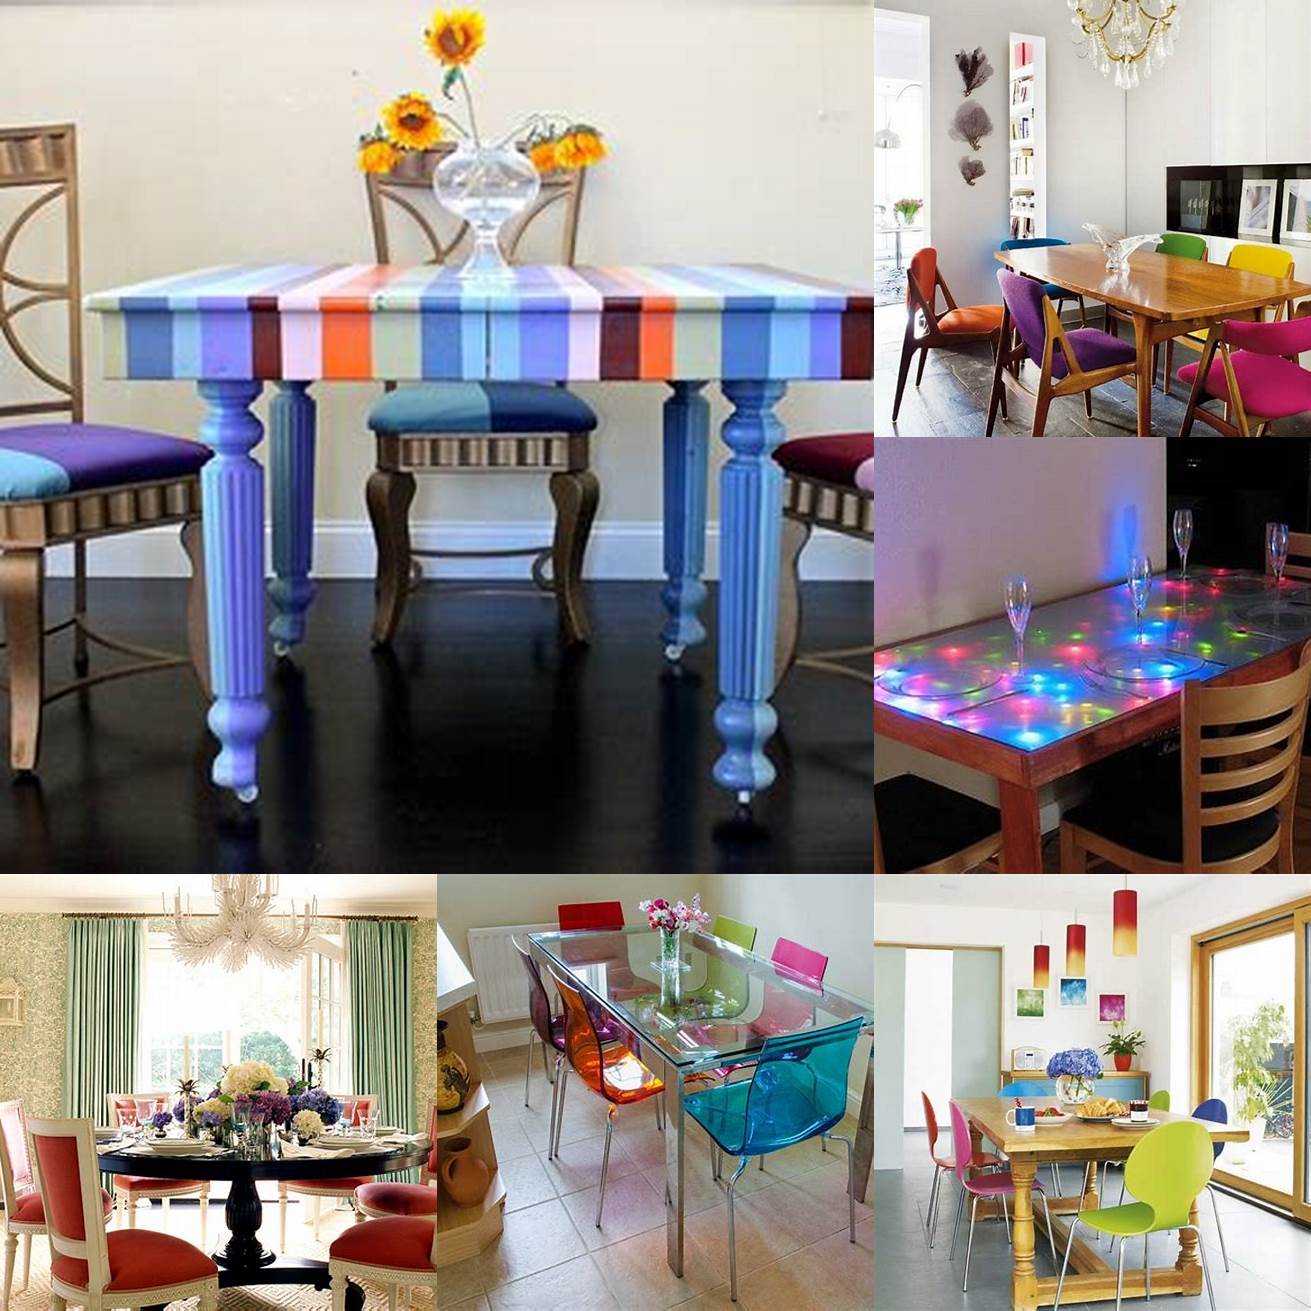 The Rainbow Dining Table adds a pop of color to any dining room